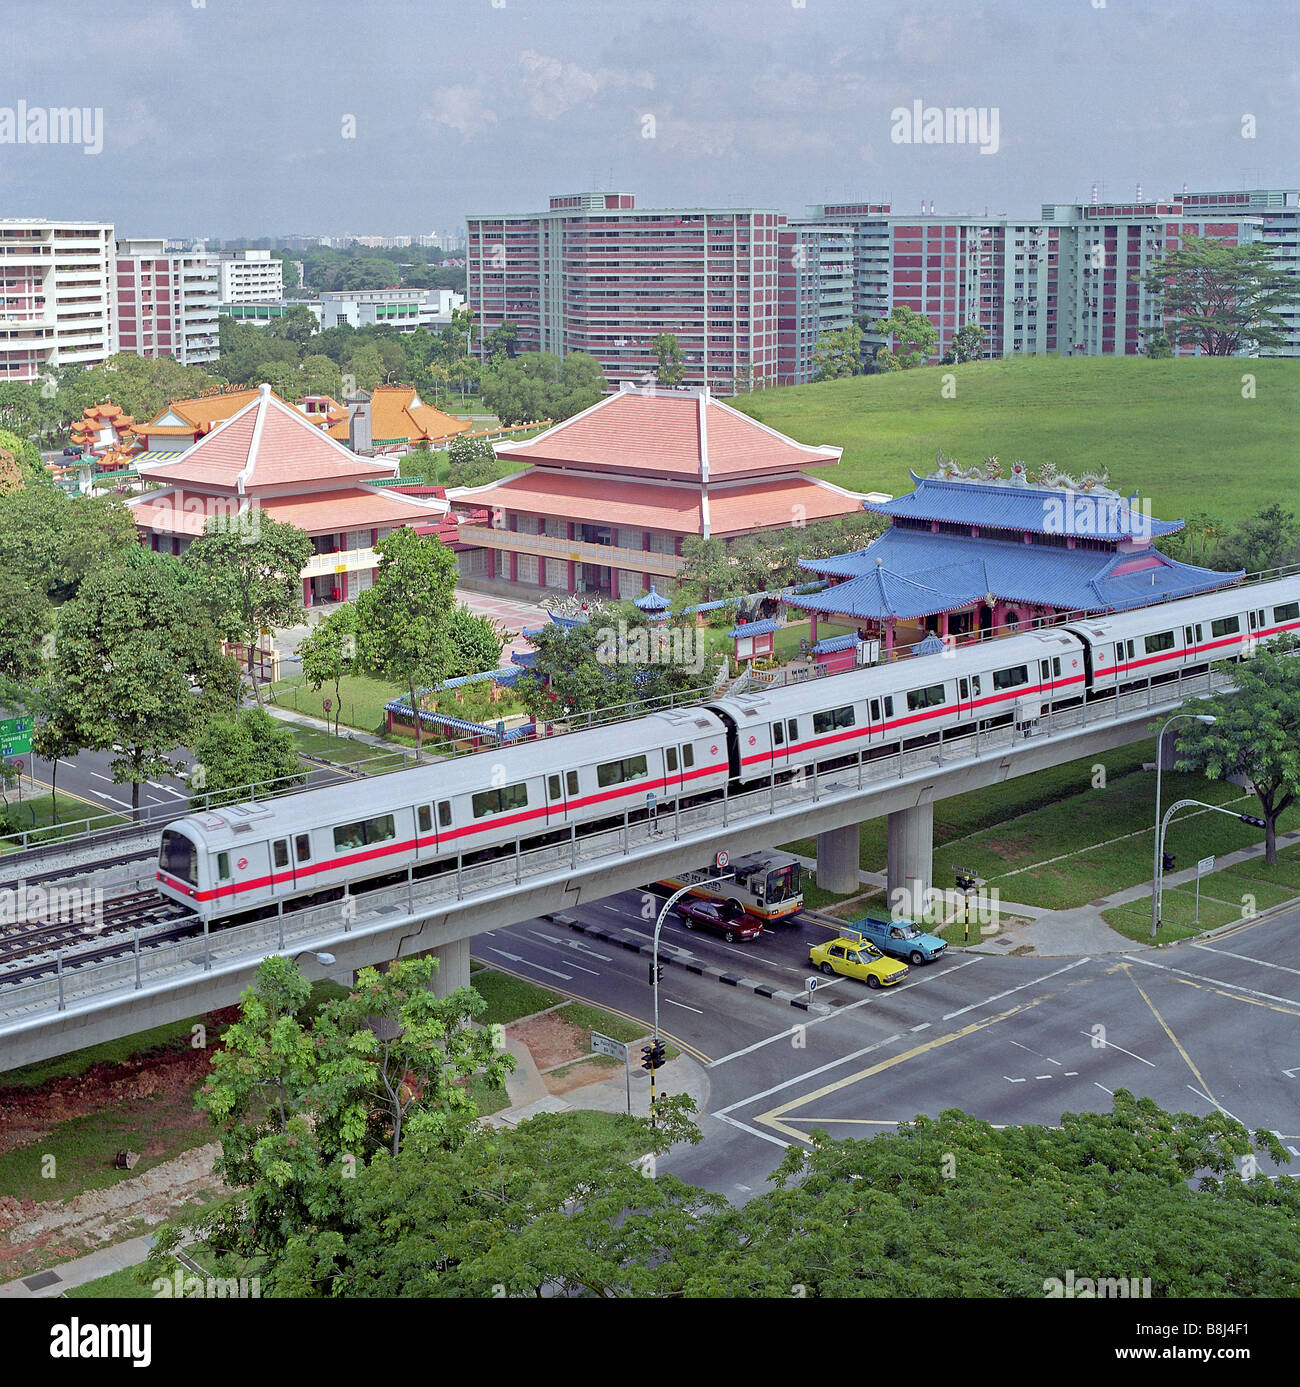 Train on elevated section of Singapore's Mass Rapid Transit which transports huge numbers of passengers with speed and safety. Stock Photo